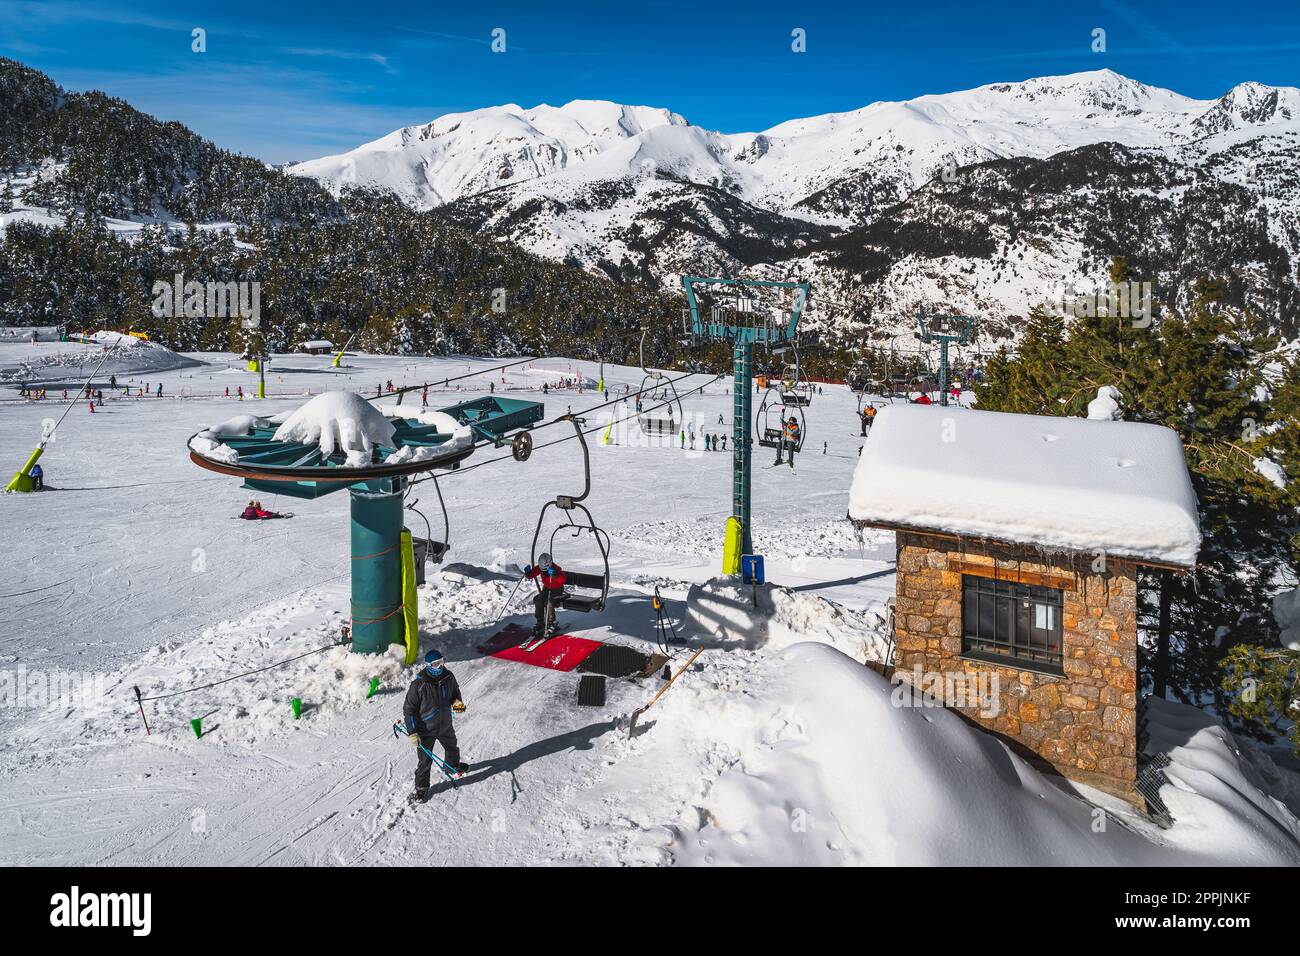 People taking off from chair ski lift with snowy mountains in a background, Andorra Stock Photo